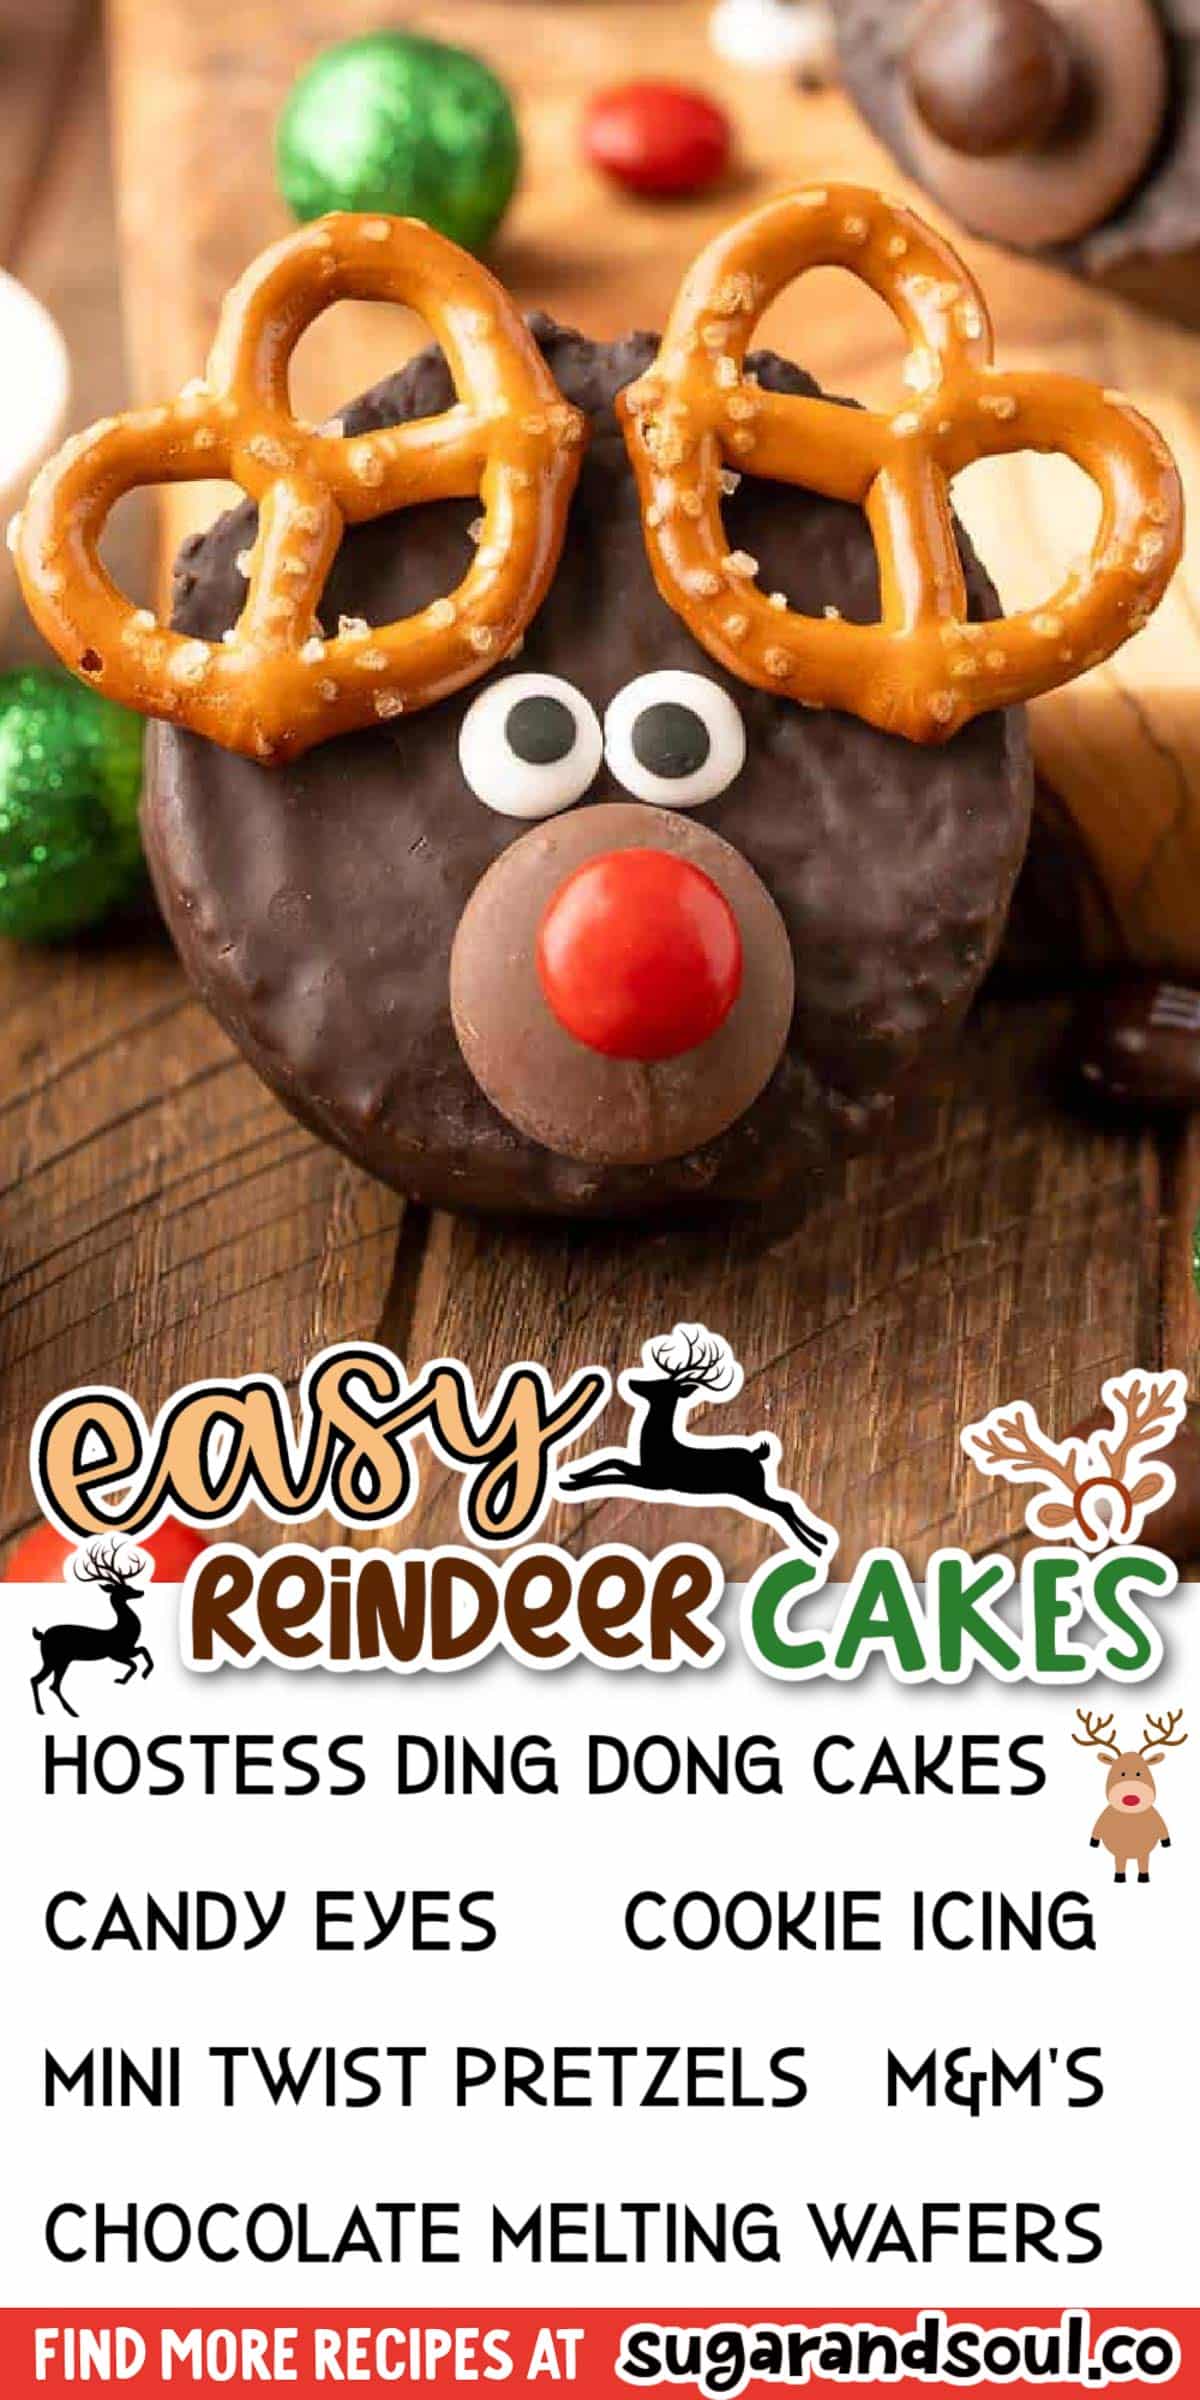 These Easy Reindeer Cakes are a quick and easy no bake holiday treat that the kids will be begging to make with you over and over again! Made with Ding Dong Cakes, pretzels, and candy in just 15 minutes! via @sugarandsoulco